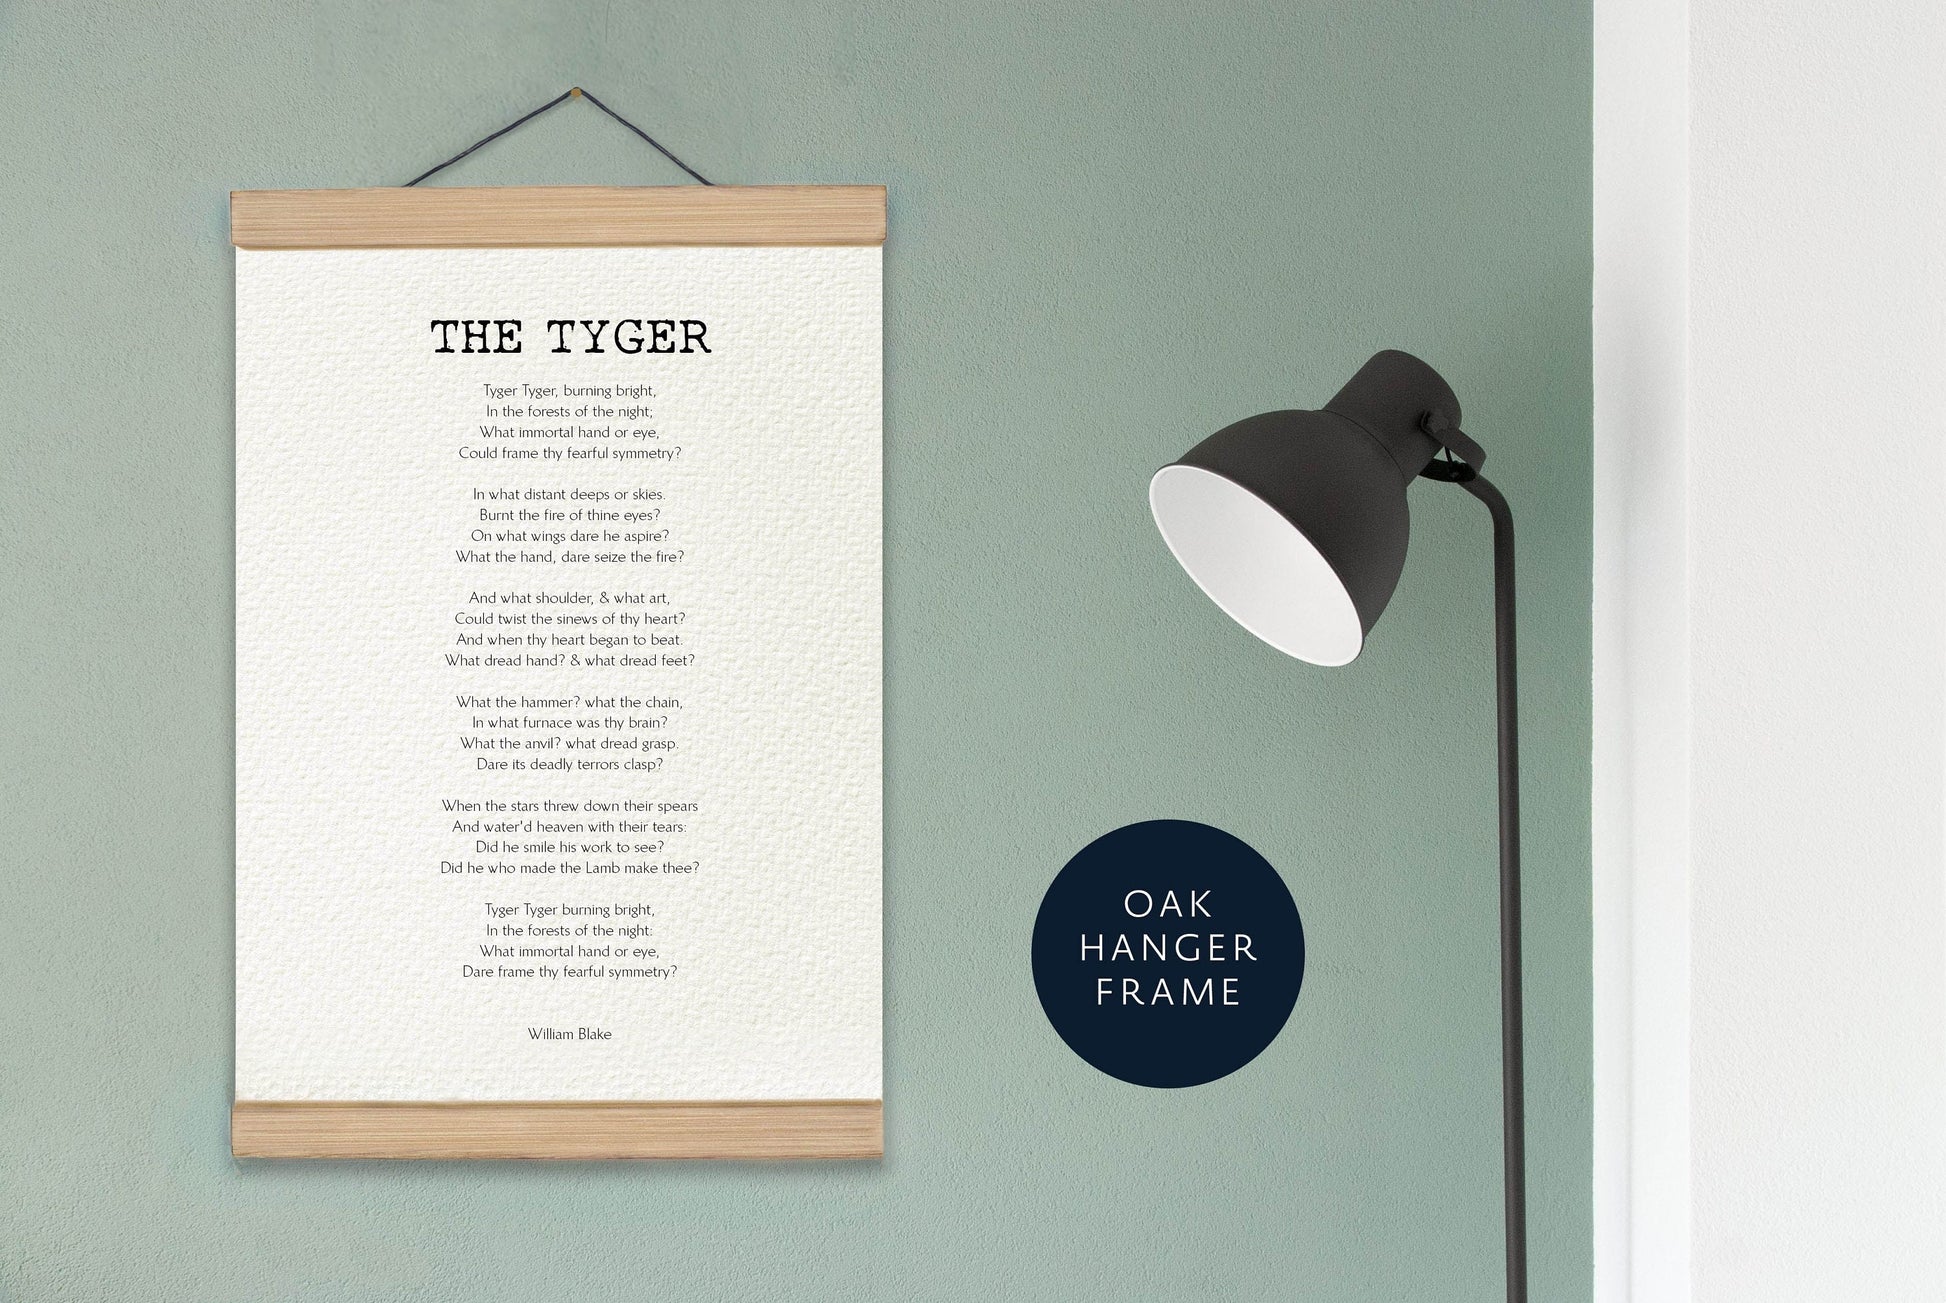 William Blake - The Tyger Framed quote print, The Tyger poster poem by Poet William Blake - Book Quote Prints - Great literature